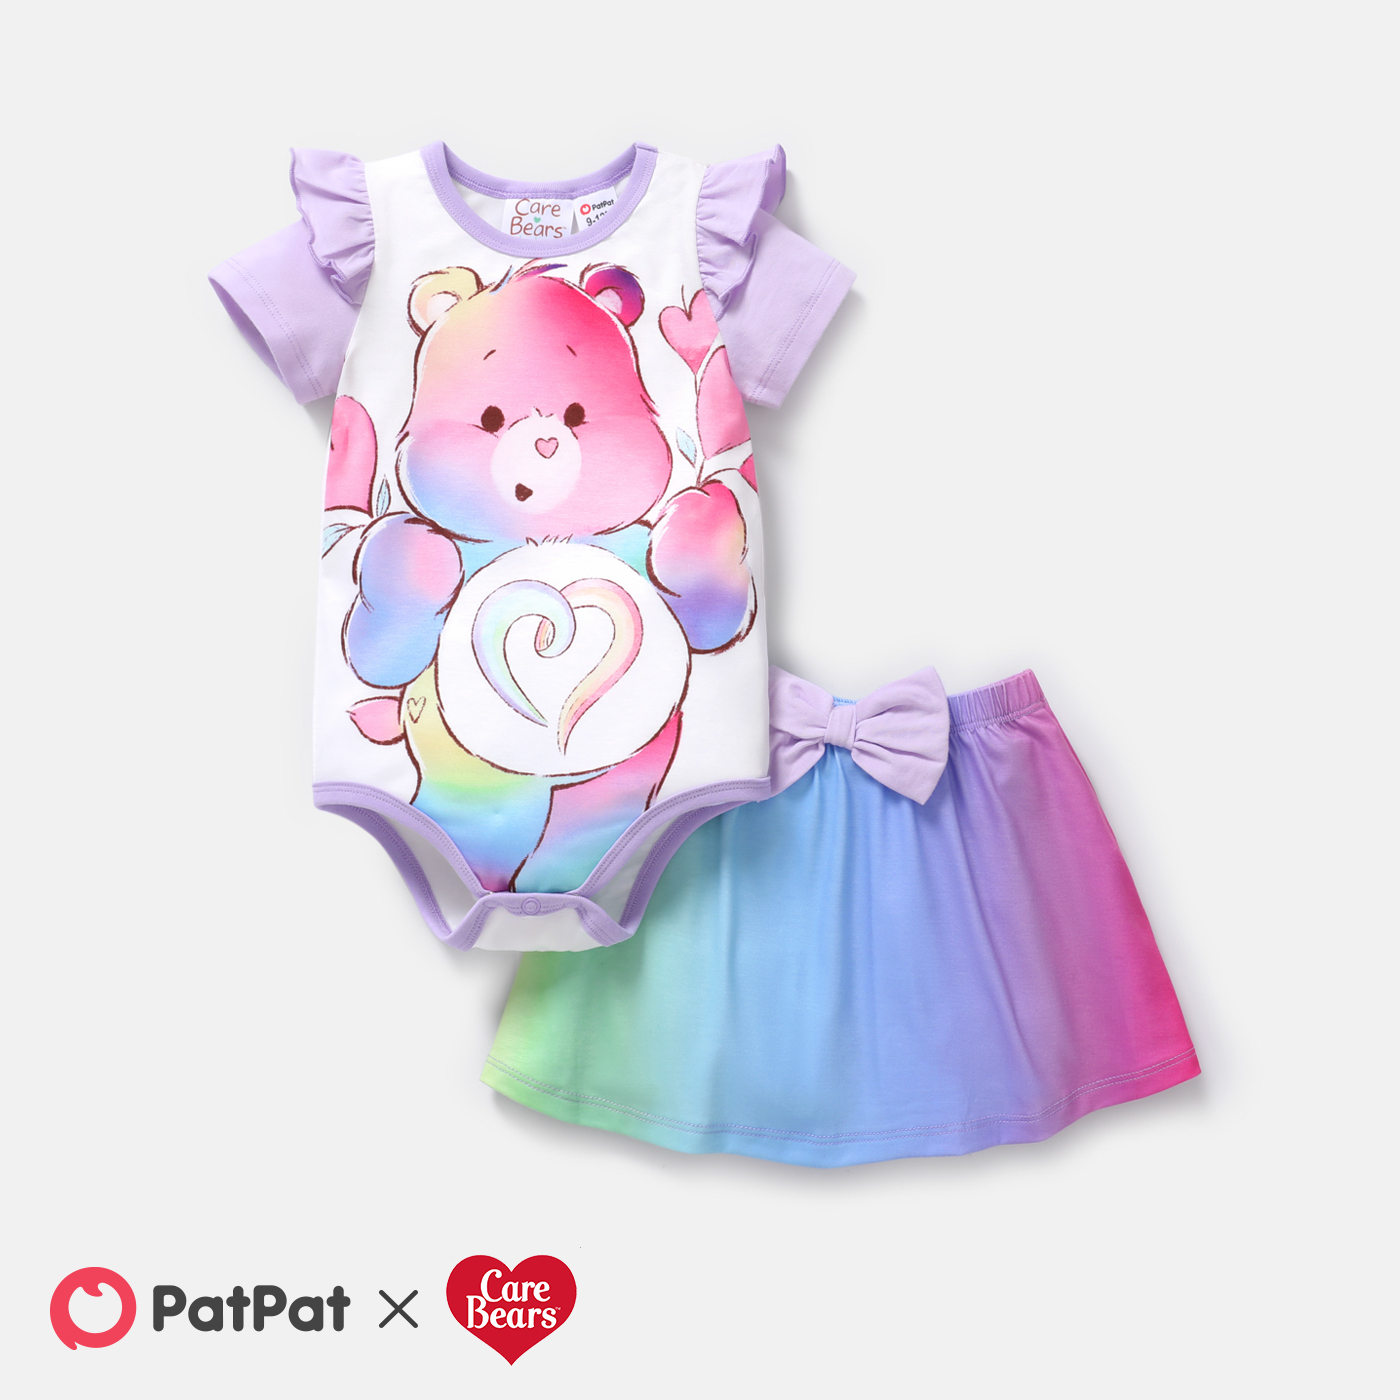 Introducing Care Bears™ Forever: RECUR and Cloudco Bring Iconic